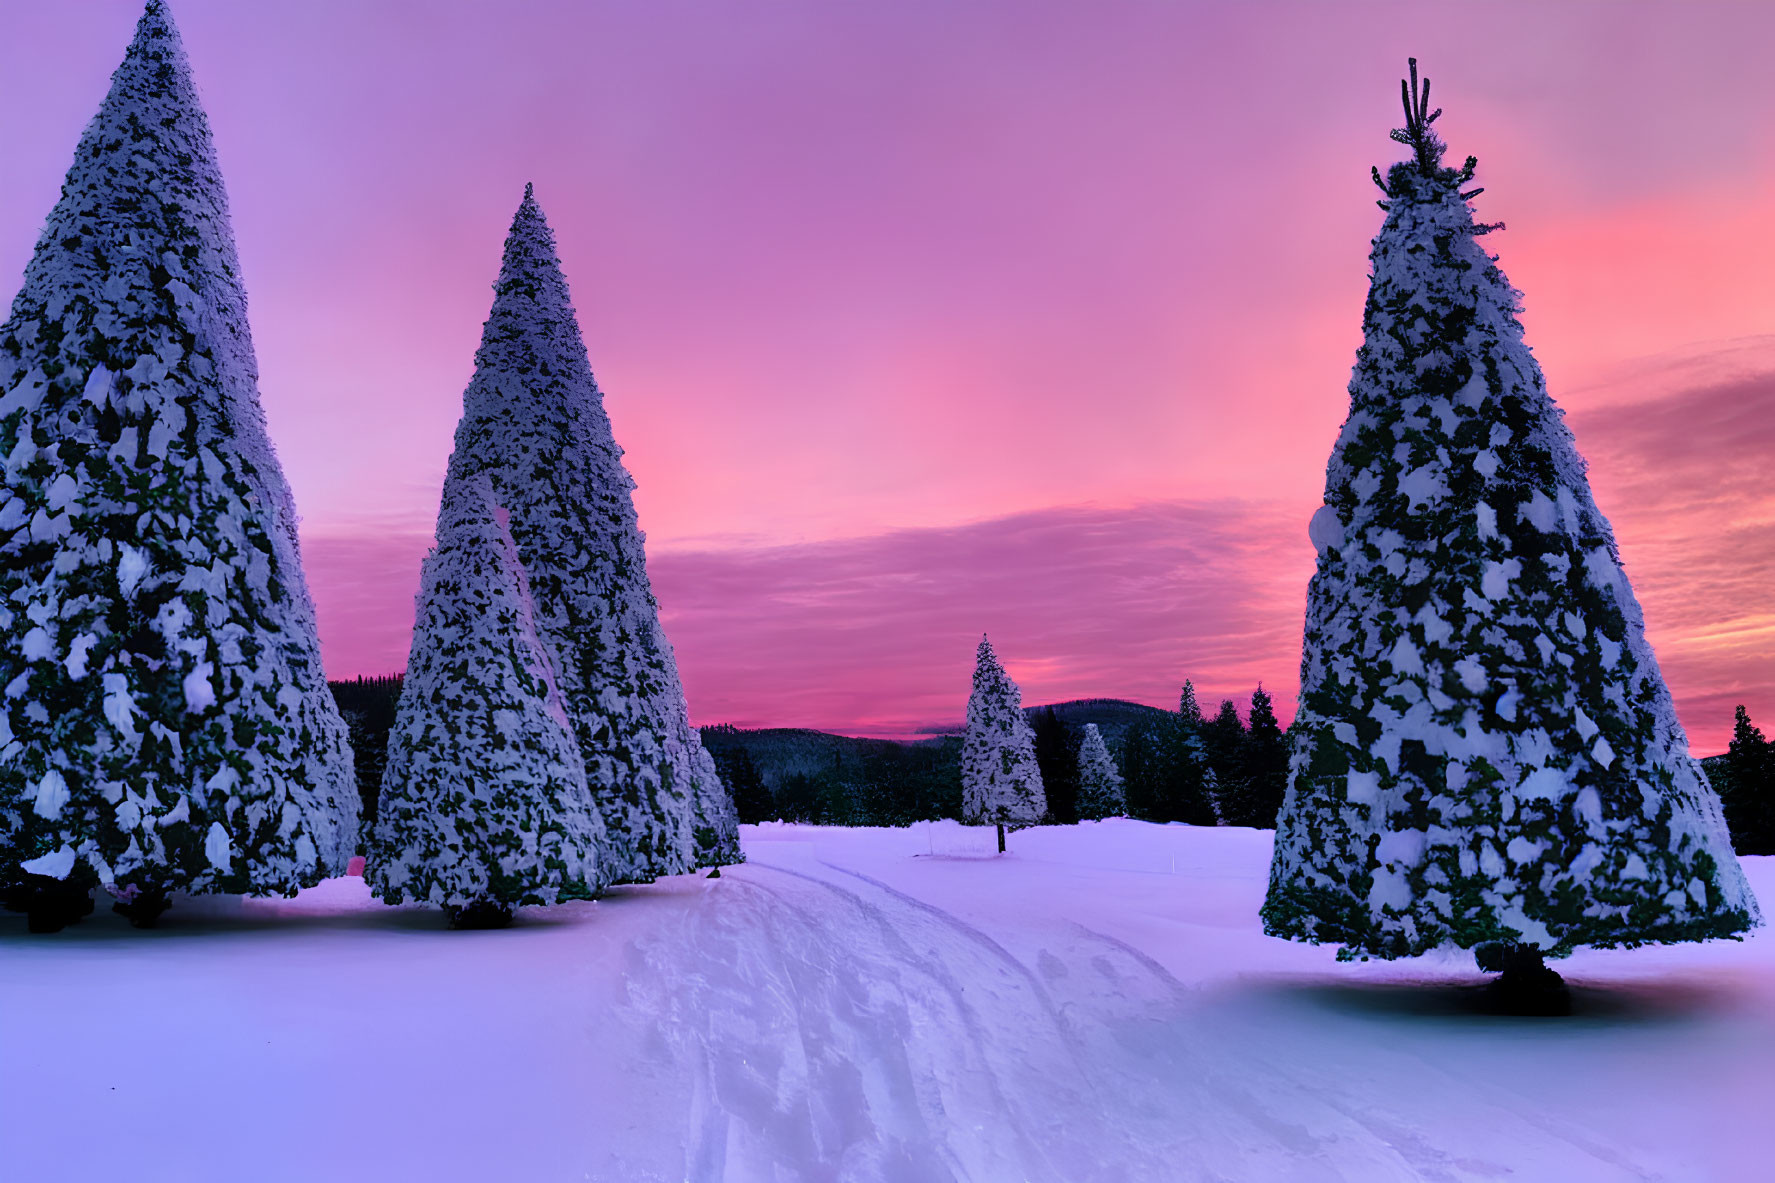 Winter scene: snow-covered trees against pink and purple dusk sky